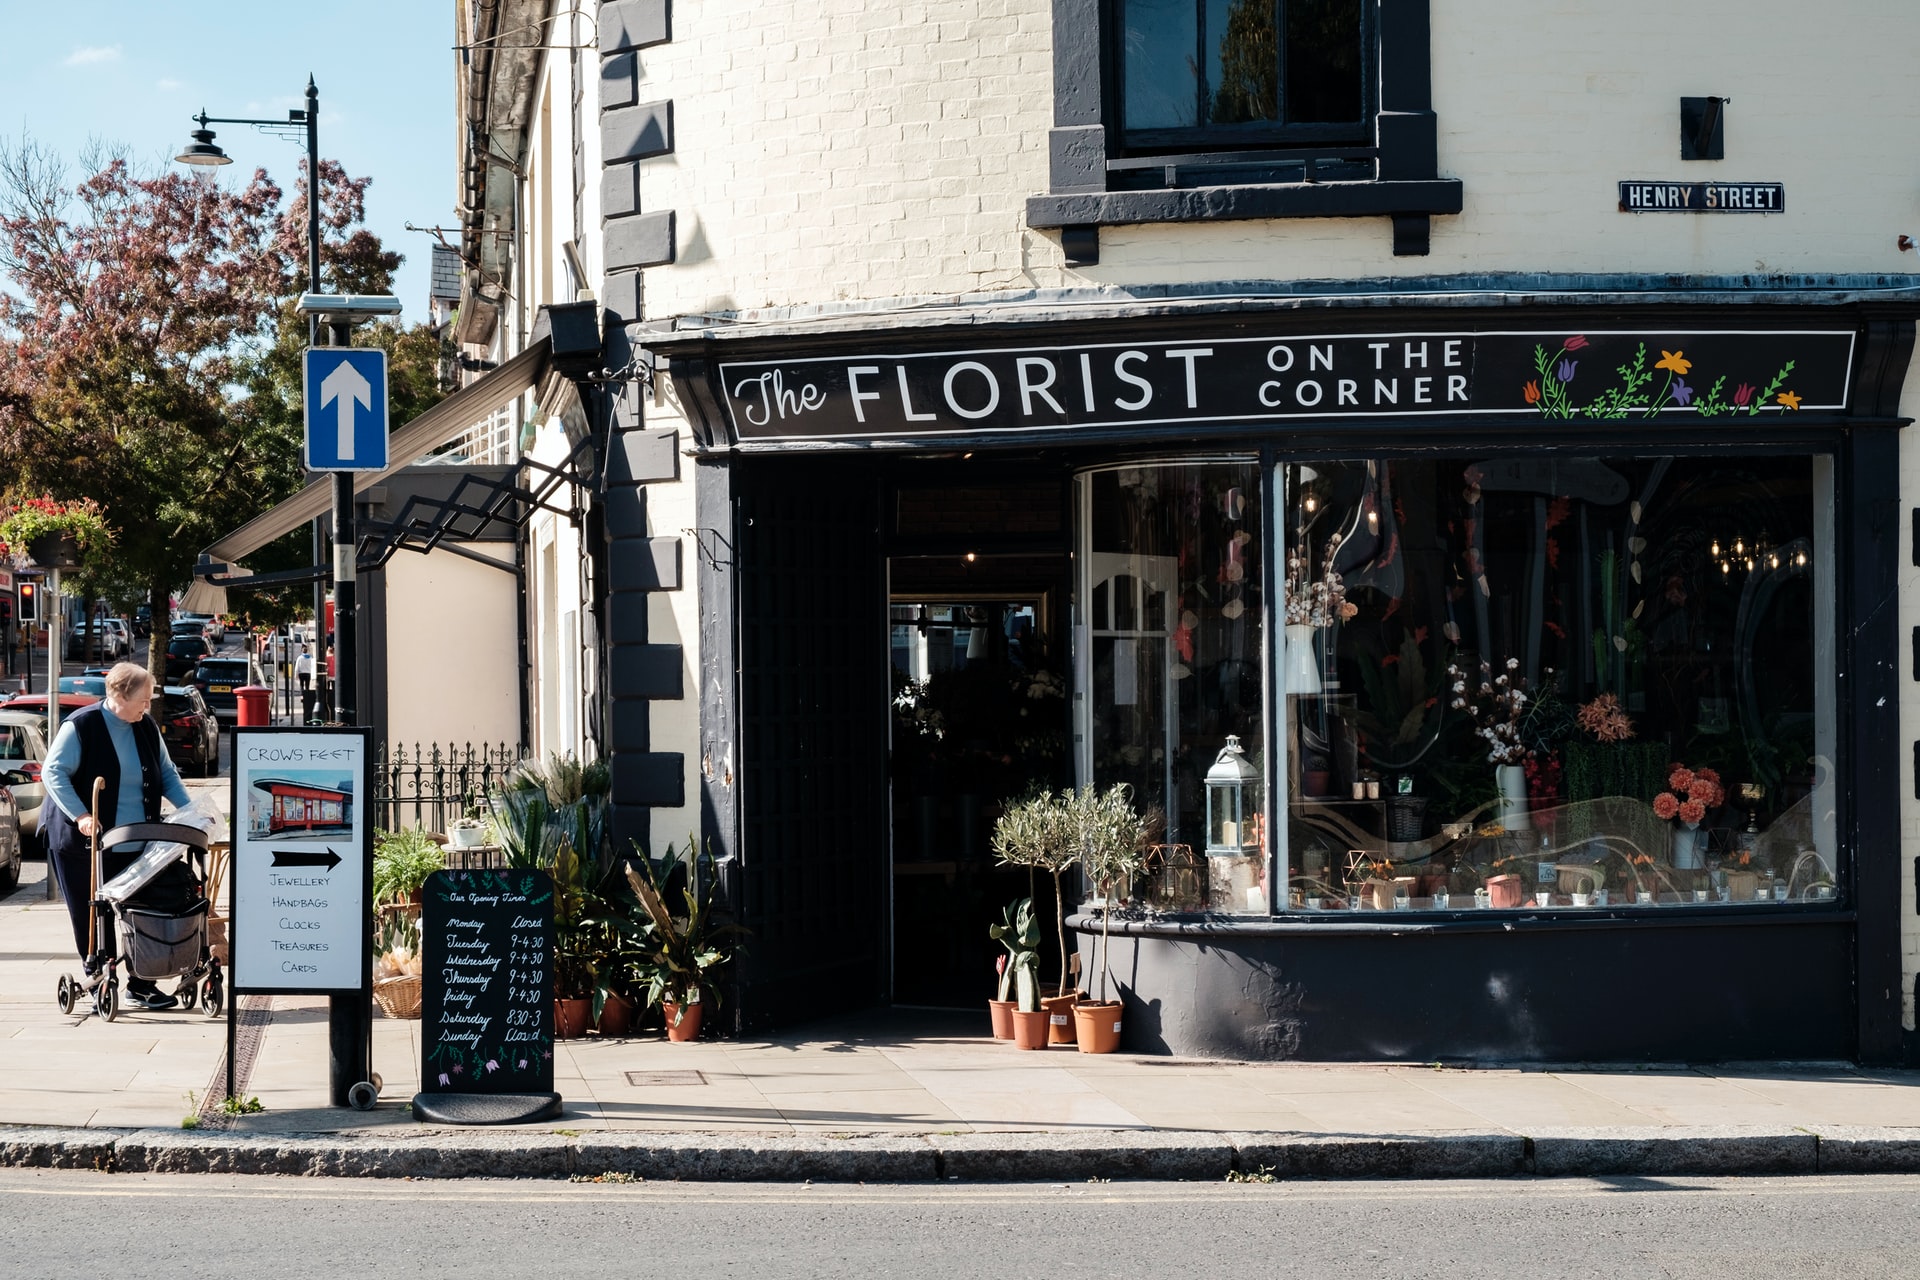 Retailing Off the Beaten Track: 15 Independent Businesses Making Quieter Locations Work